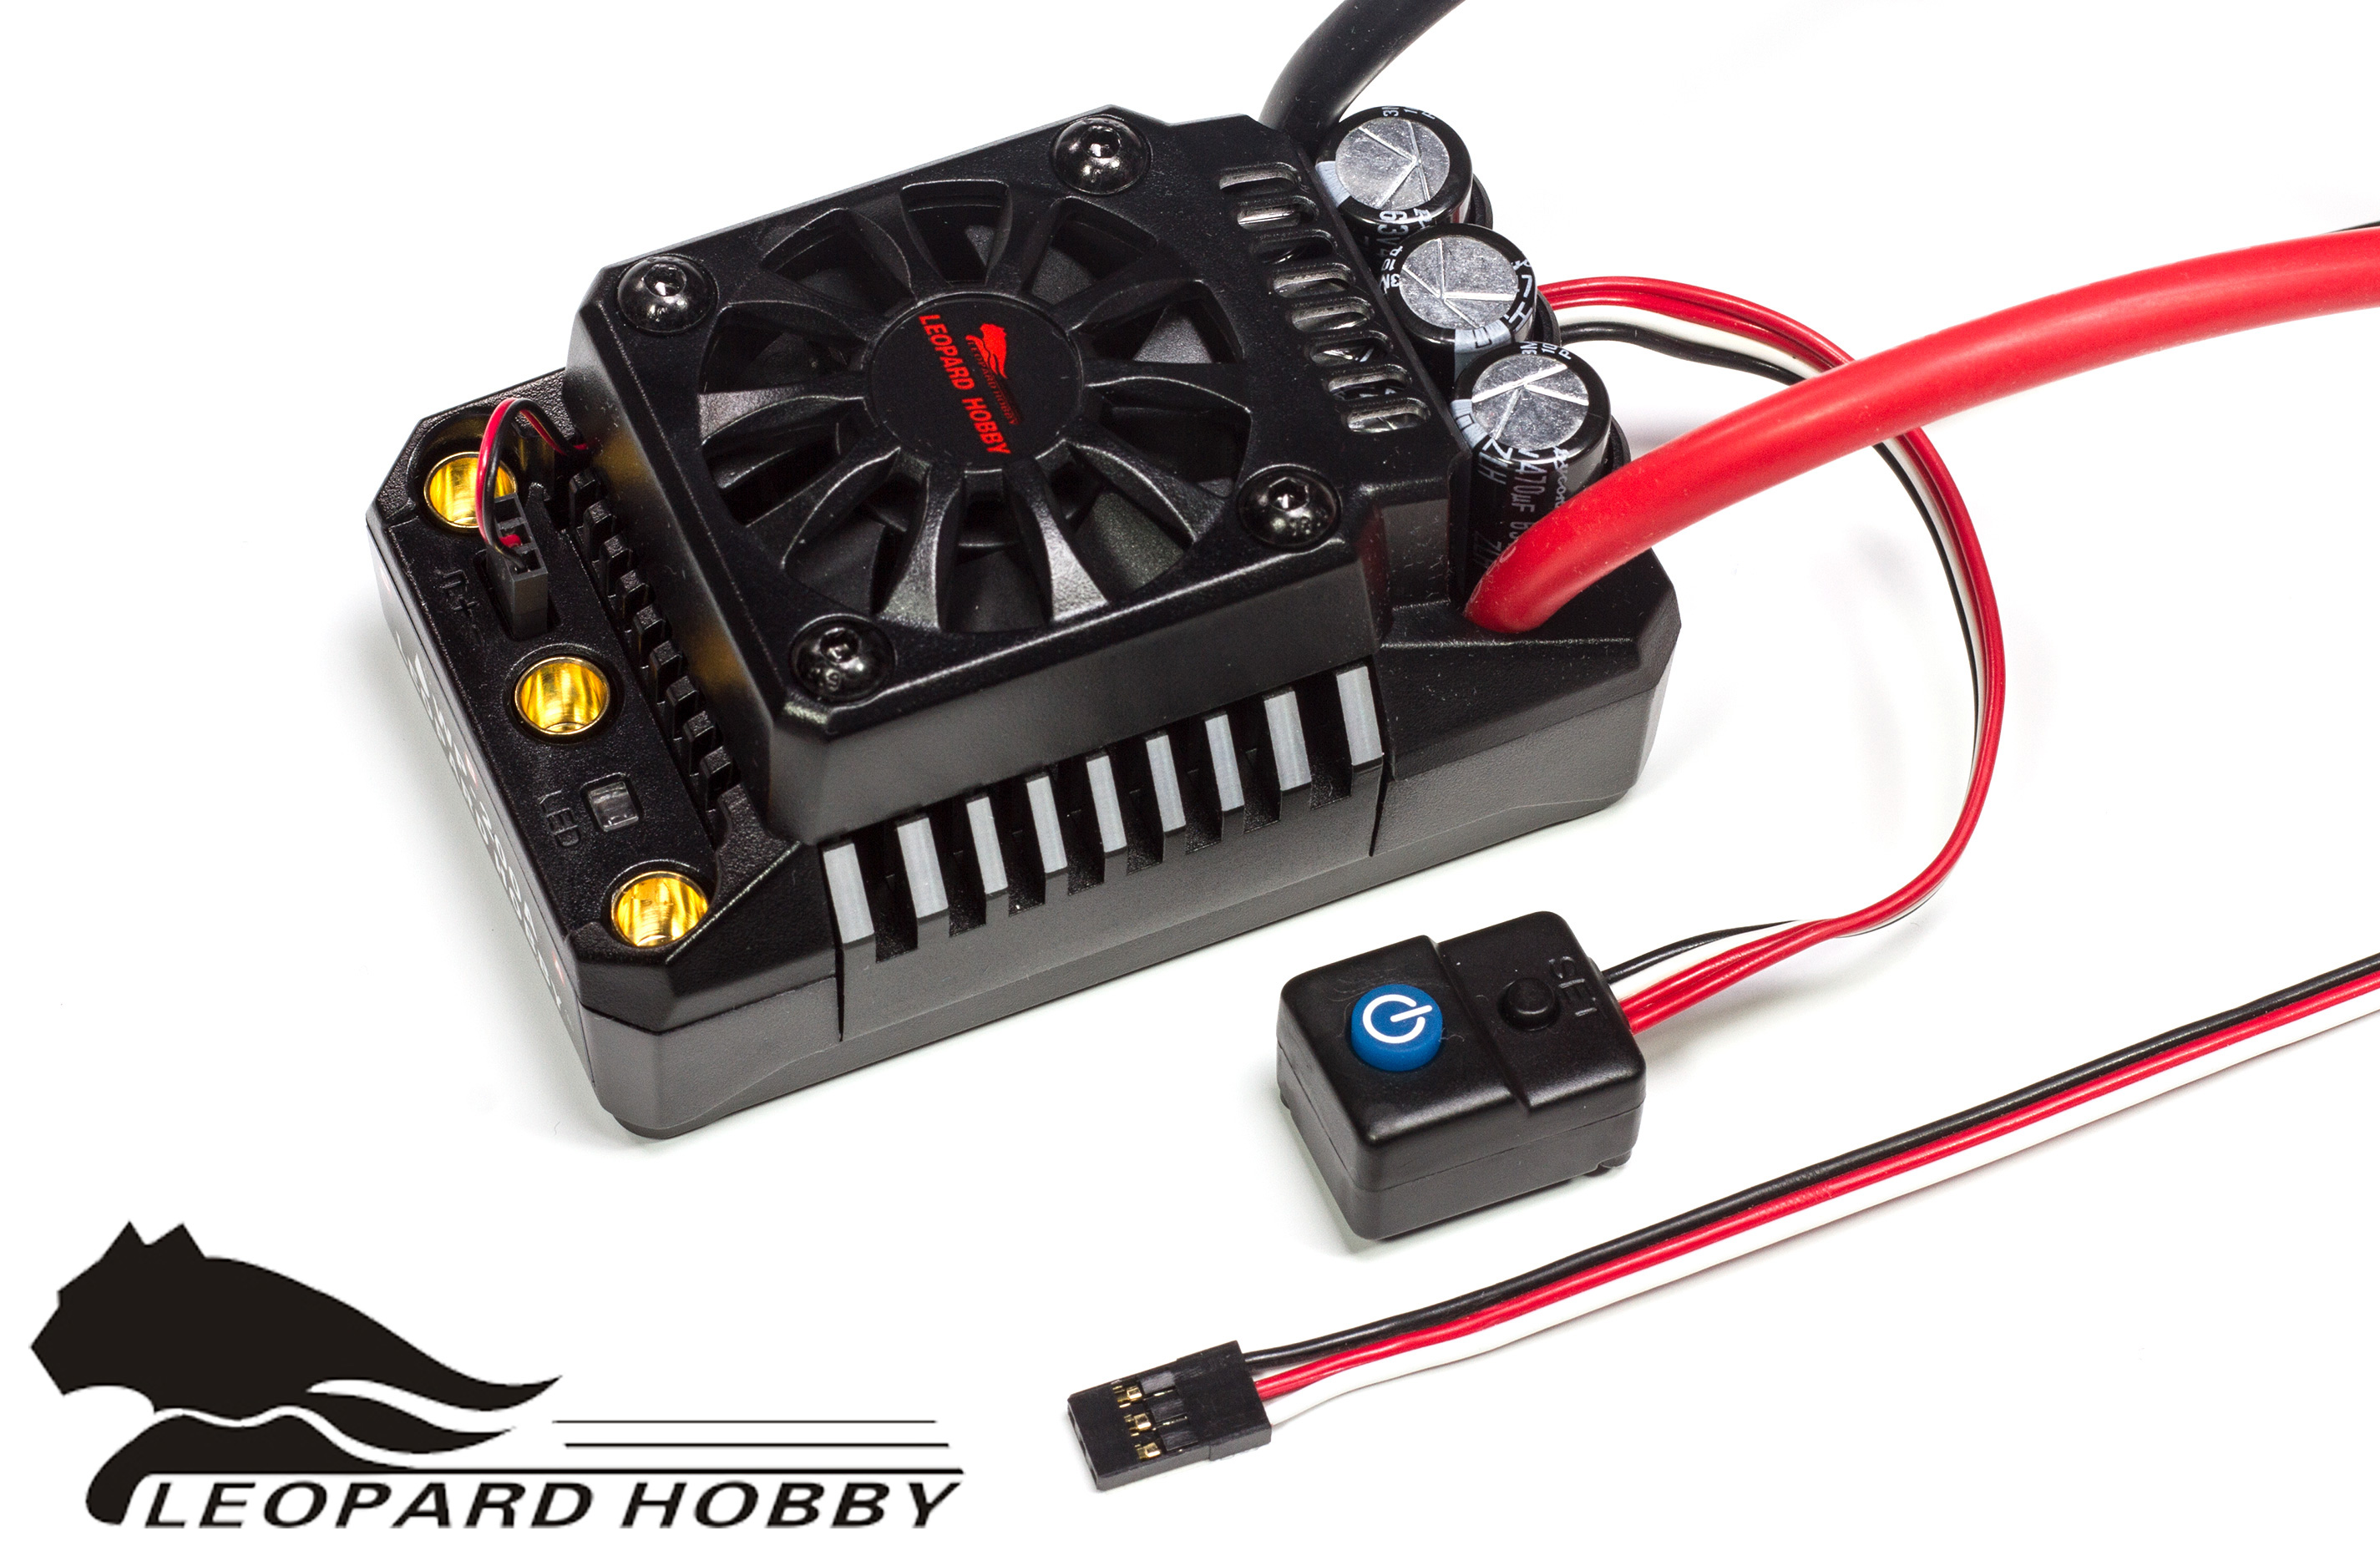 WP-BL200A Leopard Hobby RC-RUN TOP 5 V3 1:5 Brushless control 200A